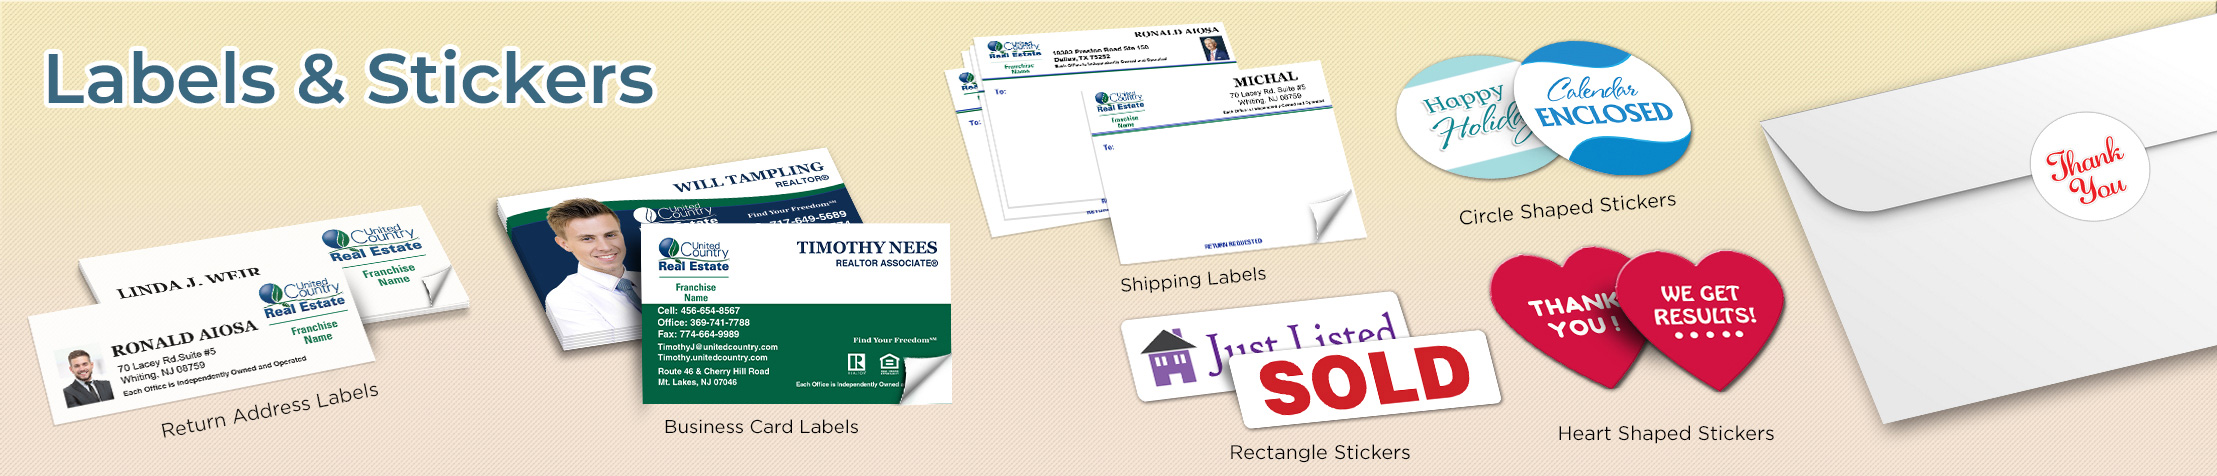 United Country Real Estate Labels and Stickers - United Country Real Estate  business card labels, return address labels, shipping labels, and assorted stickers | BestPrintBuy.com